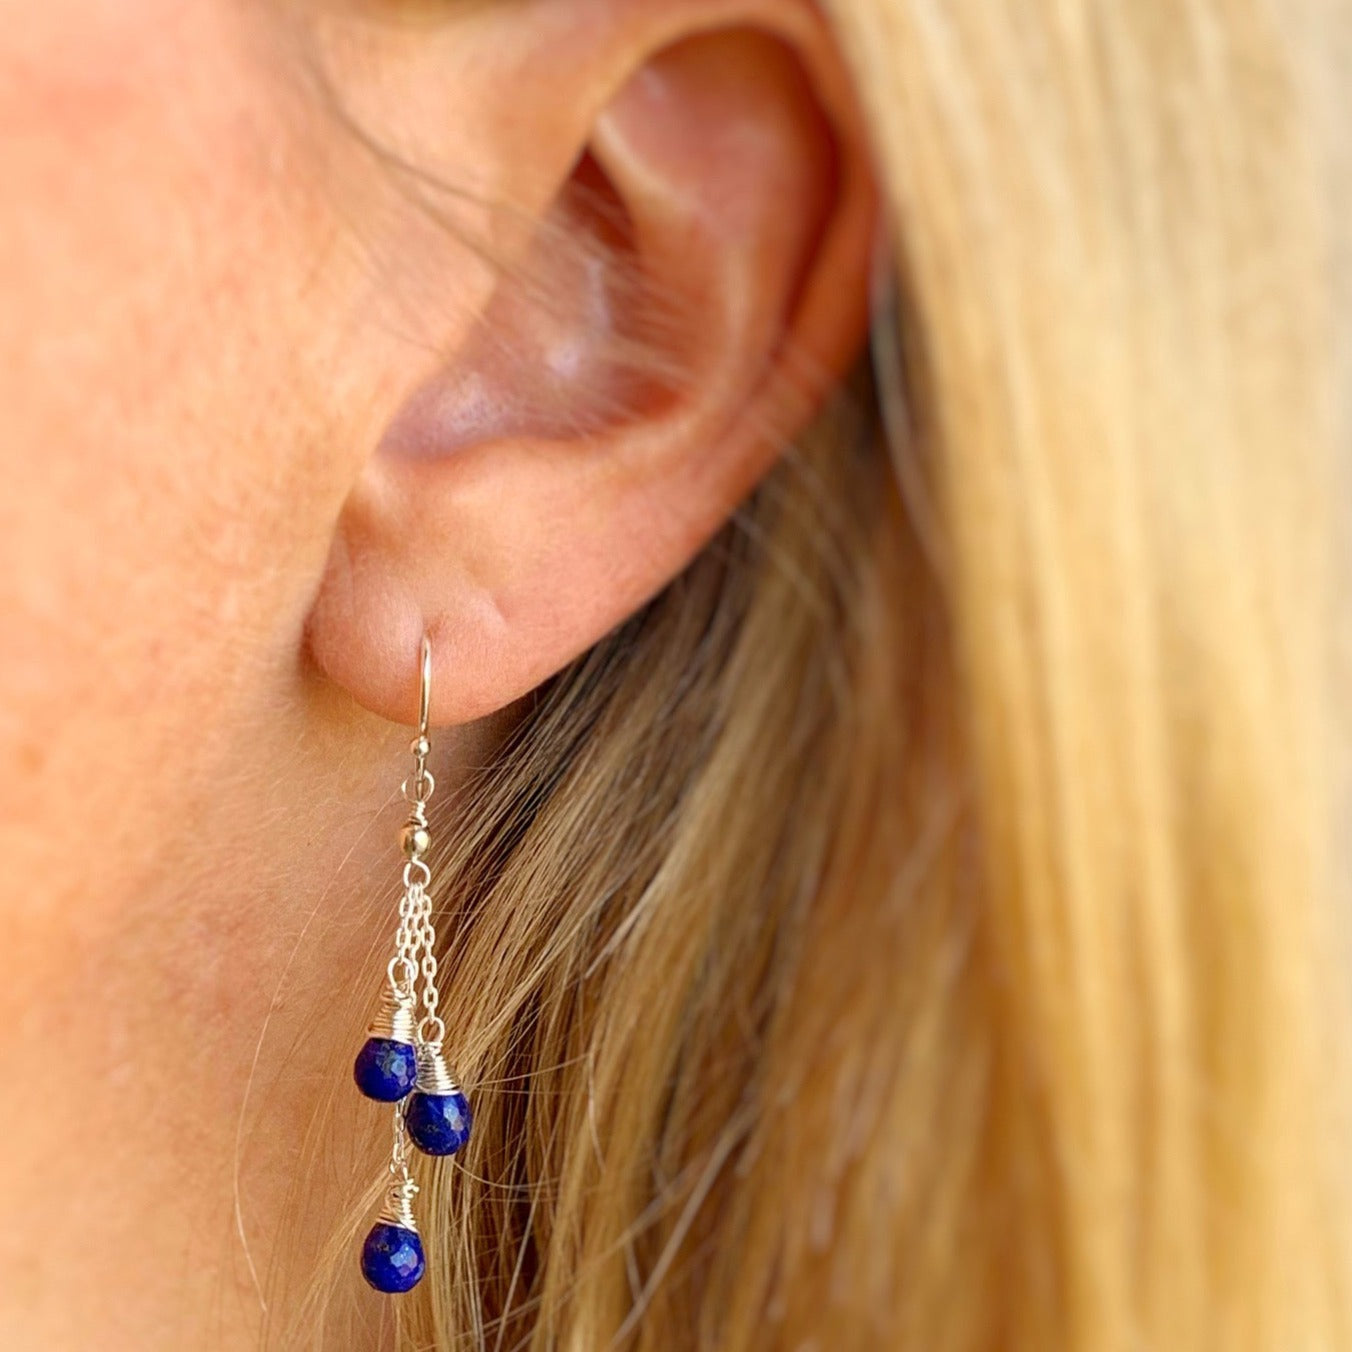 the neptune earrings by mermaids and madeleines are created with cascading lapis teardrop beads at 3 different lengths wire wrapped to sterling silver or 14k gold filled chain. the earring here is sterling silver and photographed worn on an ear and photographed close up.